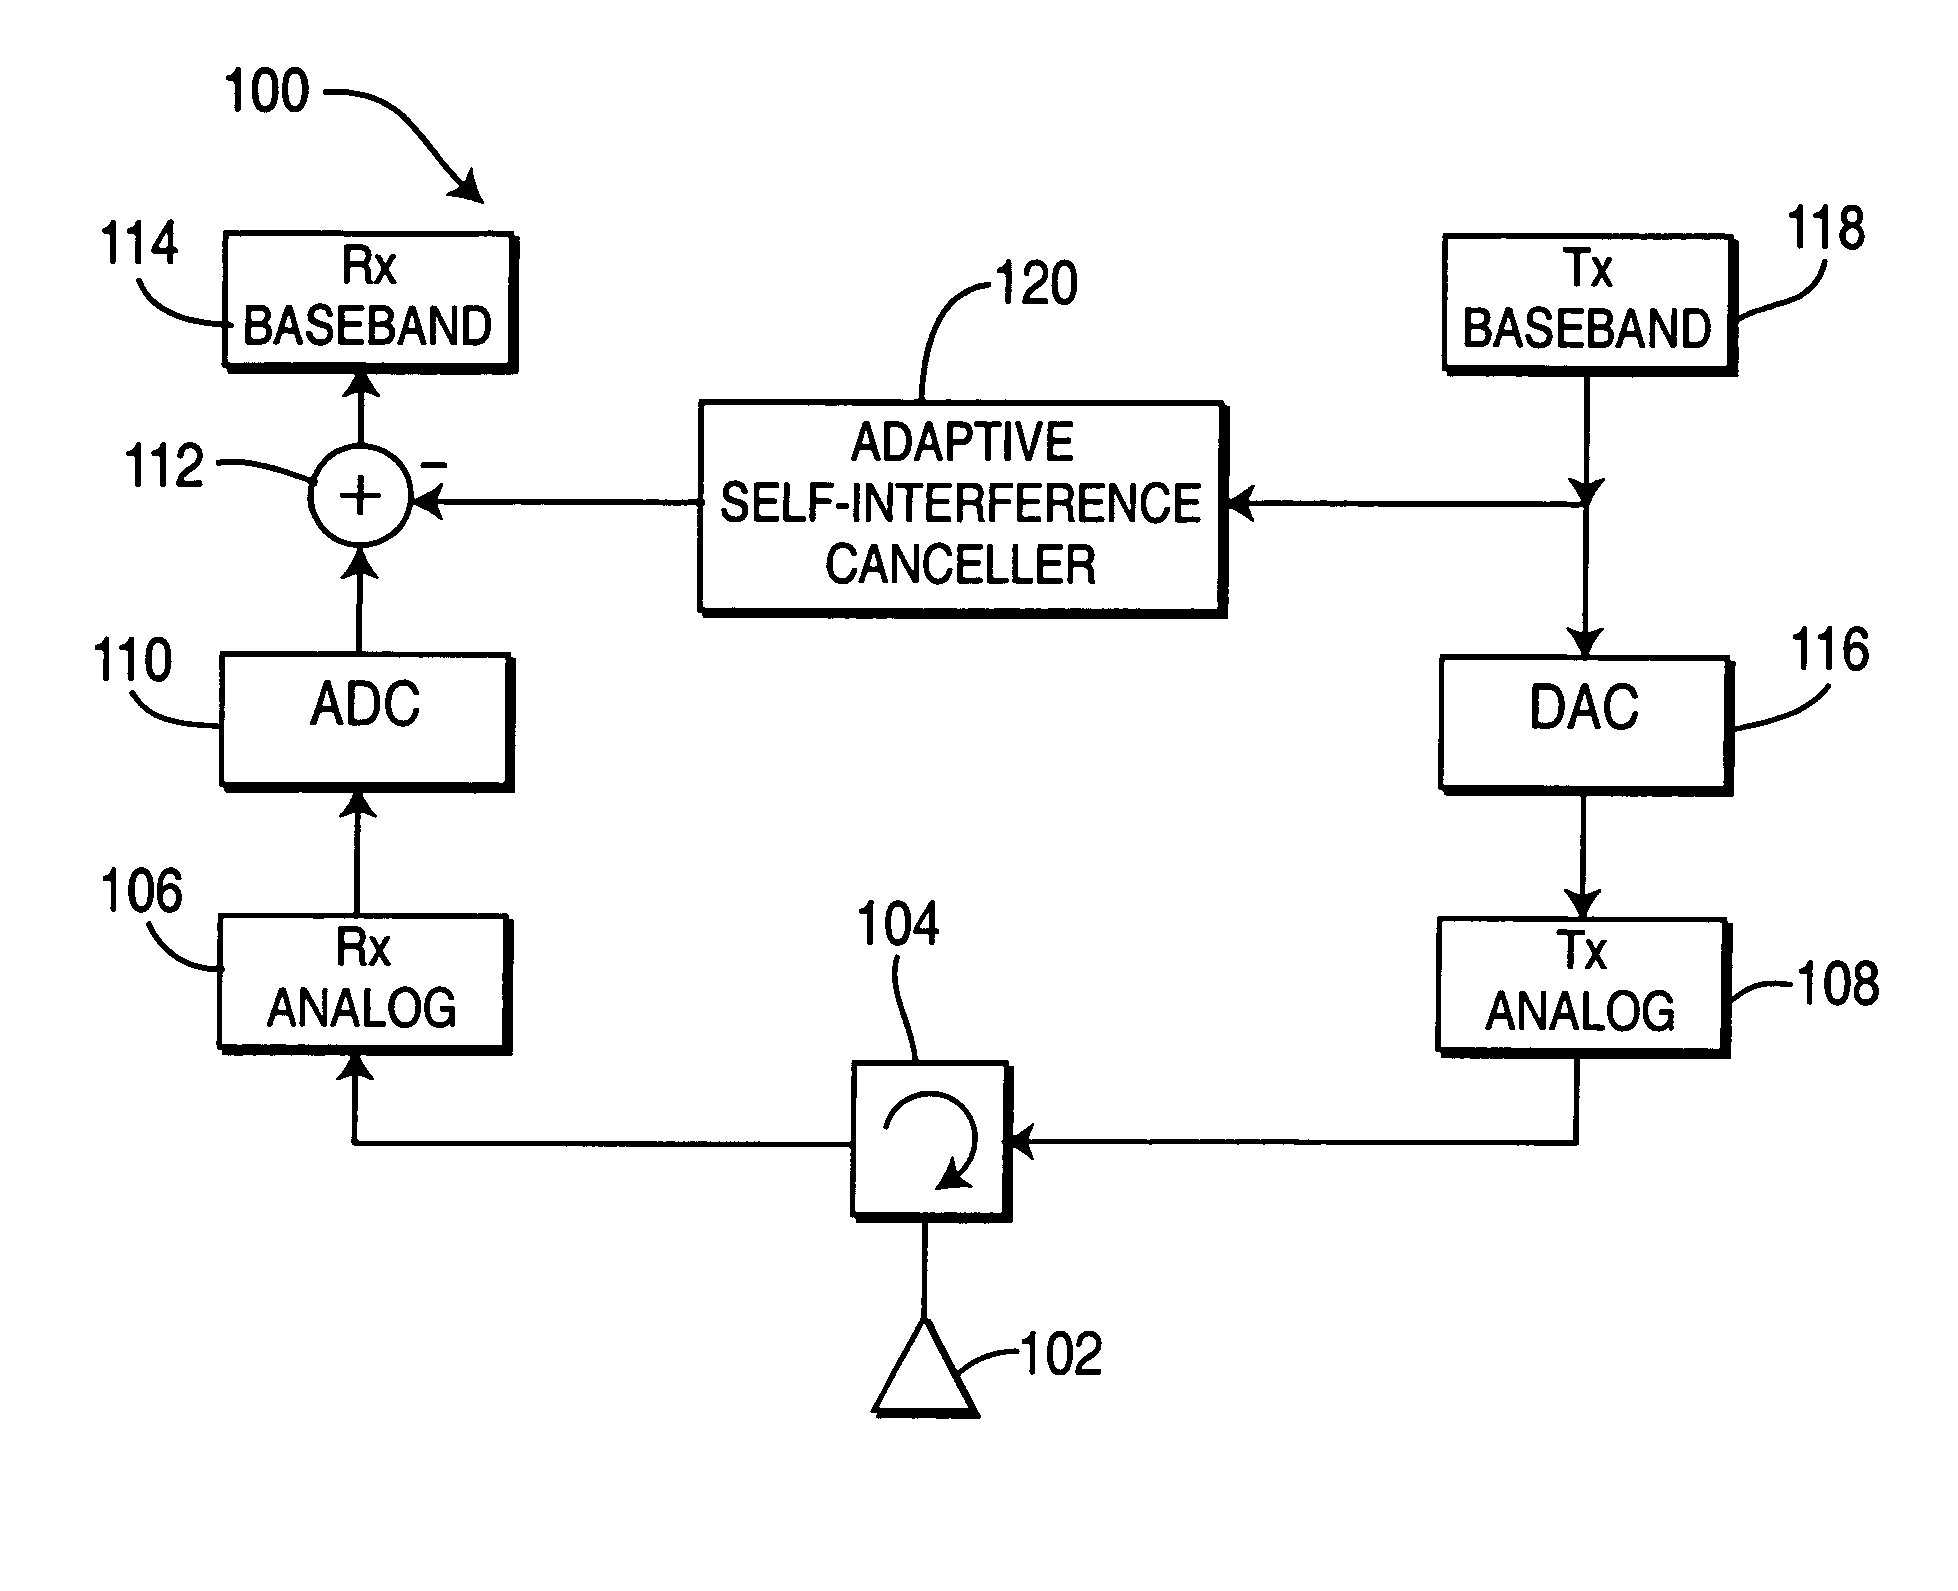 System and method for increasing cellular system capacity by the use of the same frequency and time slot for both uplink and downlink transmissions